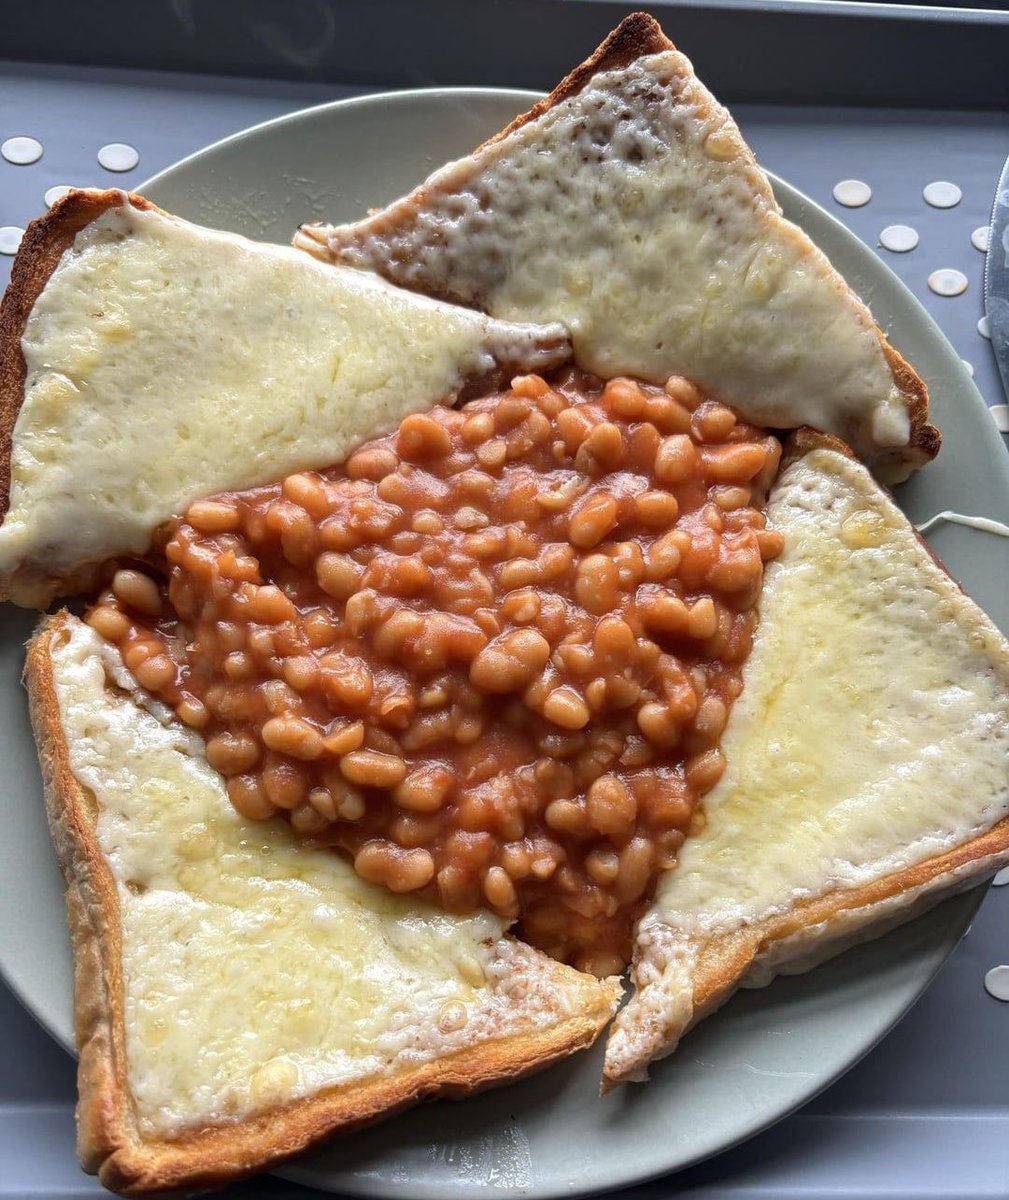 Beans and Cheese on Toast… Yes or No? 🤔